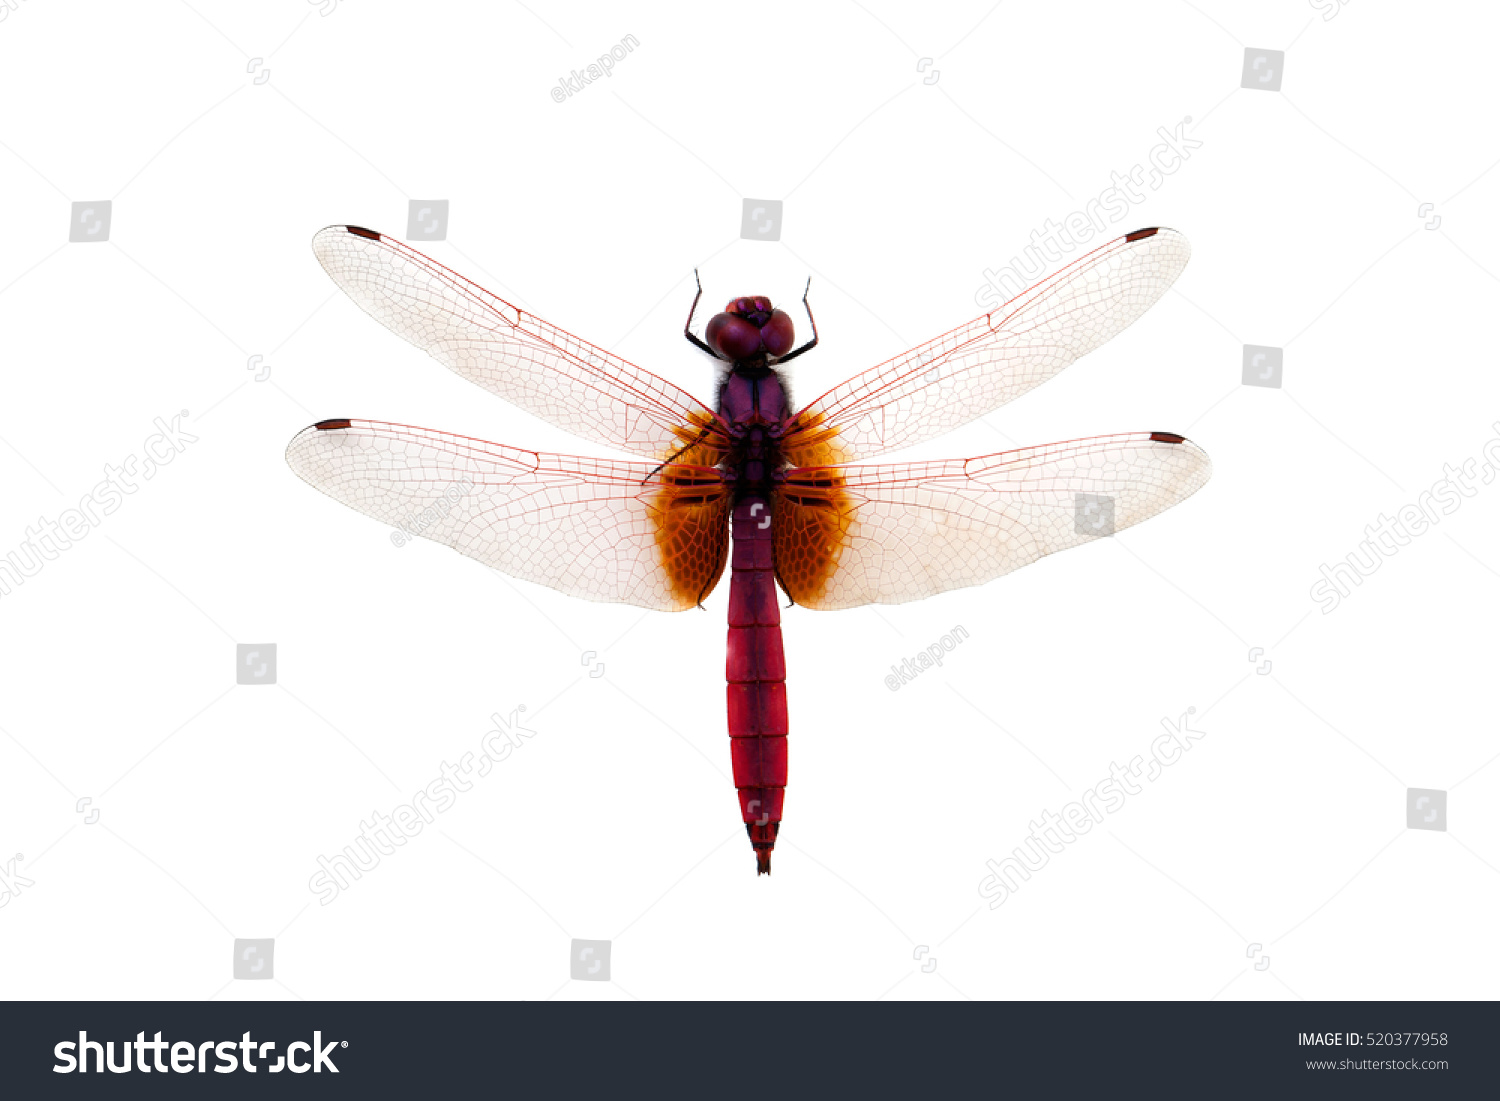 Dragonfly Isolated On White Background Stock Photo 520377958 : Shutterstock